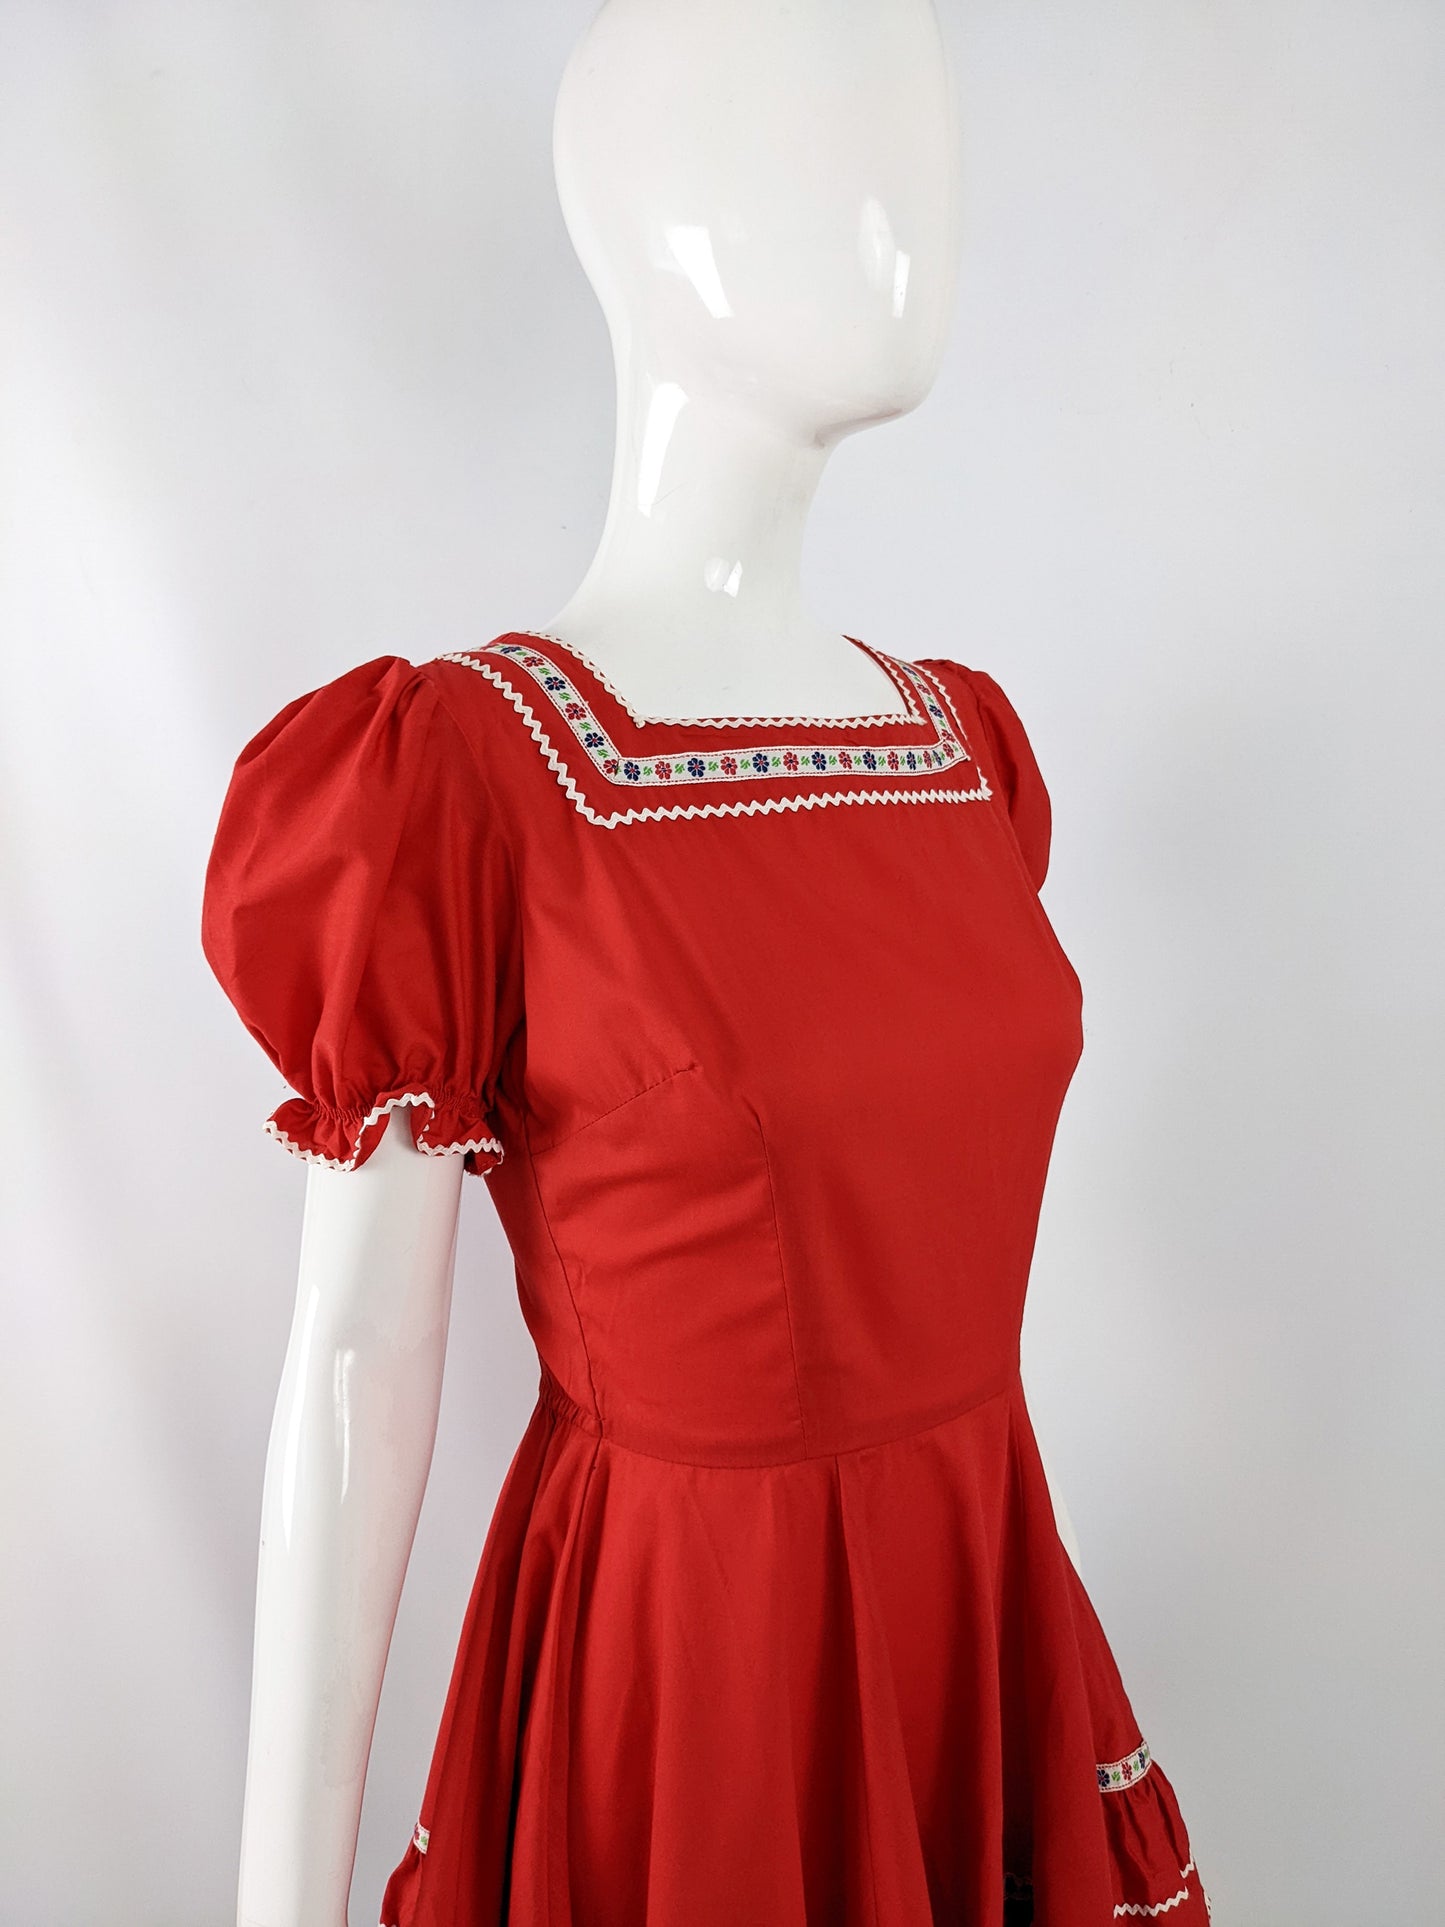 Vintage Red Full Skirt Puffed Sleeve 50s Style Patio Dress, 1970s